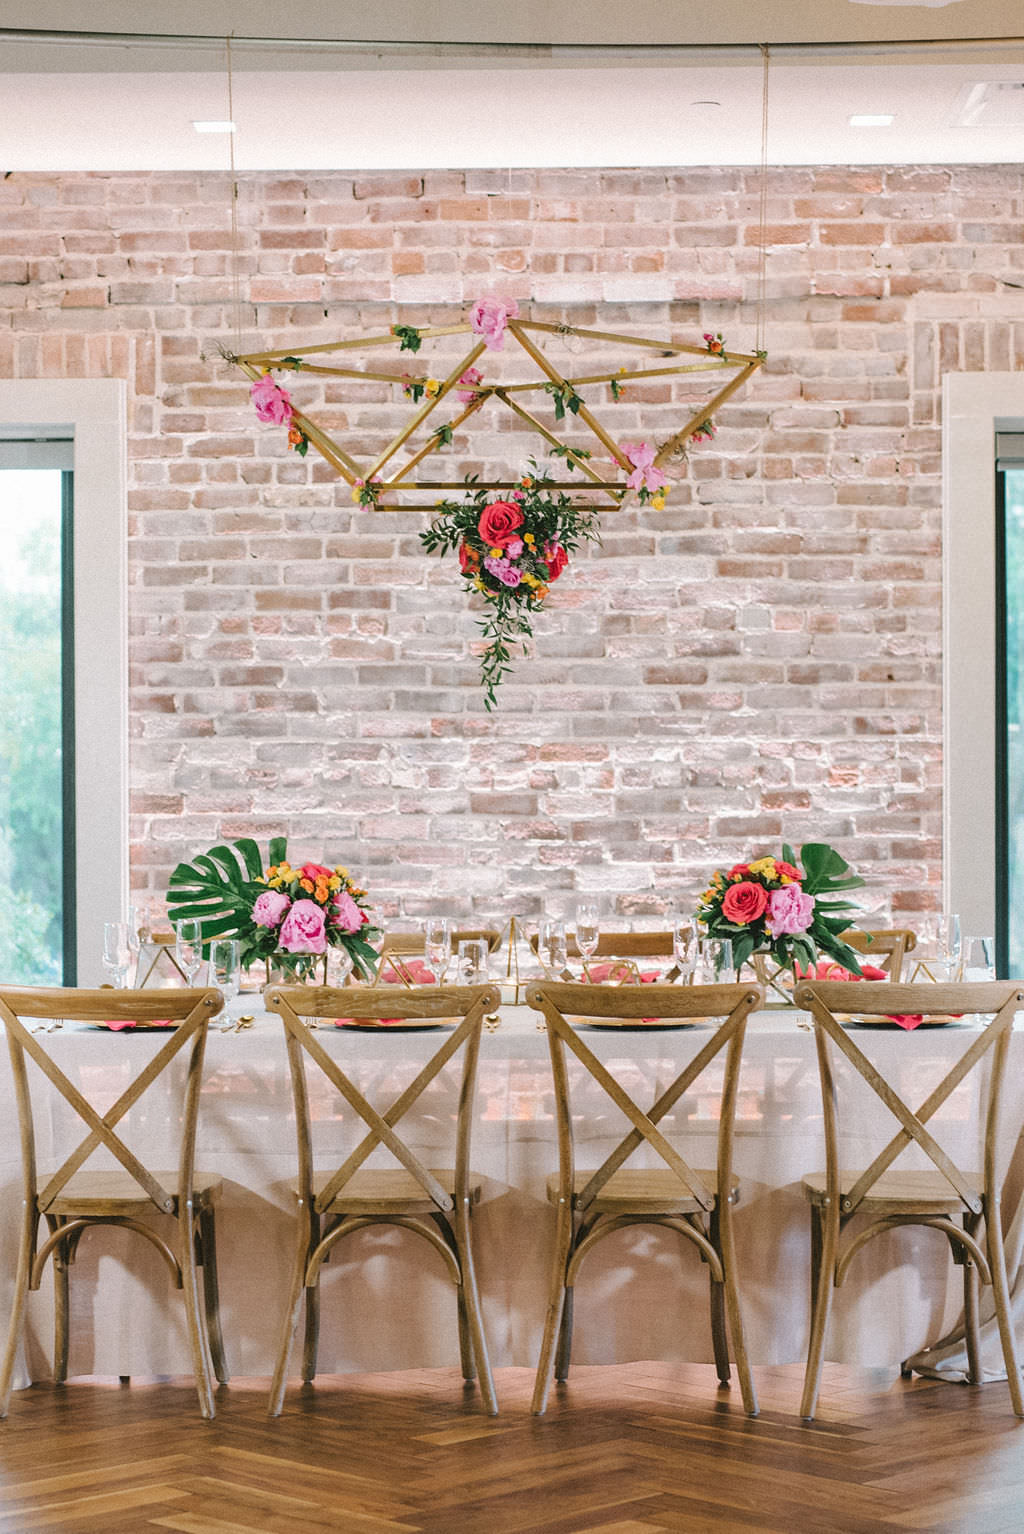 Modern Colorful Tropical Wedding Reception Decor, Feasting Table with Sheer White Linen, Wooden Crossback Chairs, Pink and Yellow Flowers and Green Monstera Palm Leaf Centerpieces, Hanging Gold Geometric Chandelier with Orange, Pink and Greenery Floral Arrangement | Tampa Bay Wedding Photographer Kera Photography | Downtown St. Pete Modern Wedding Venue Red Mesa Events | Wedding Florist and Rentals Gabro Event Services | Wedding Linen and Tabletop Rentals Kate Ryan Event Rentals | Wedding Planner UNIQUE Weddings & Events